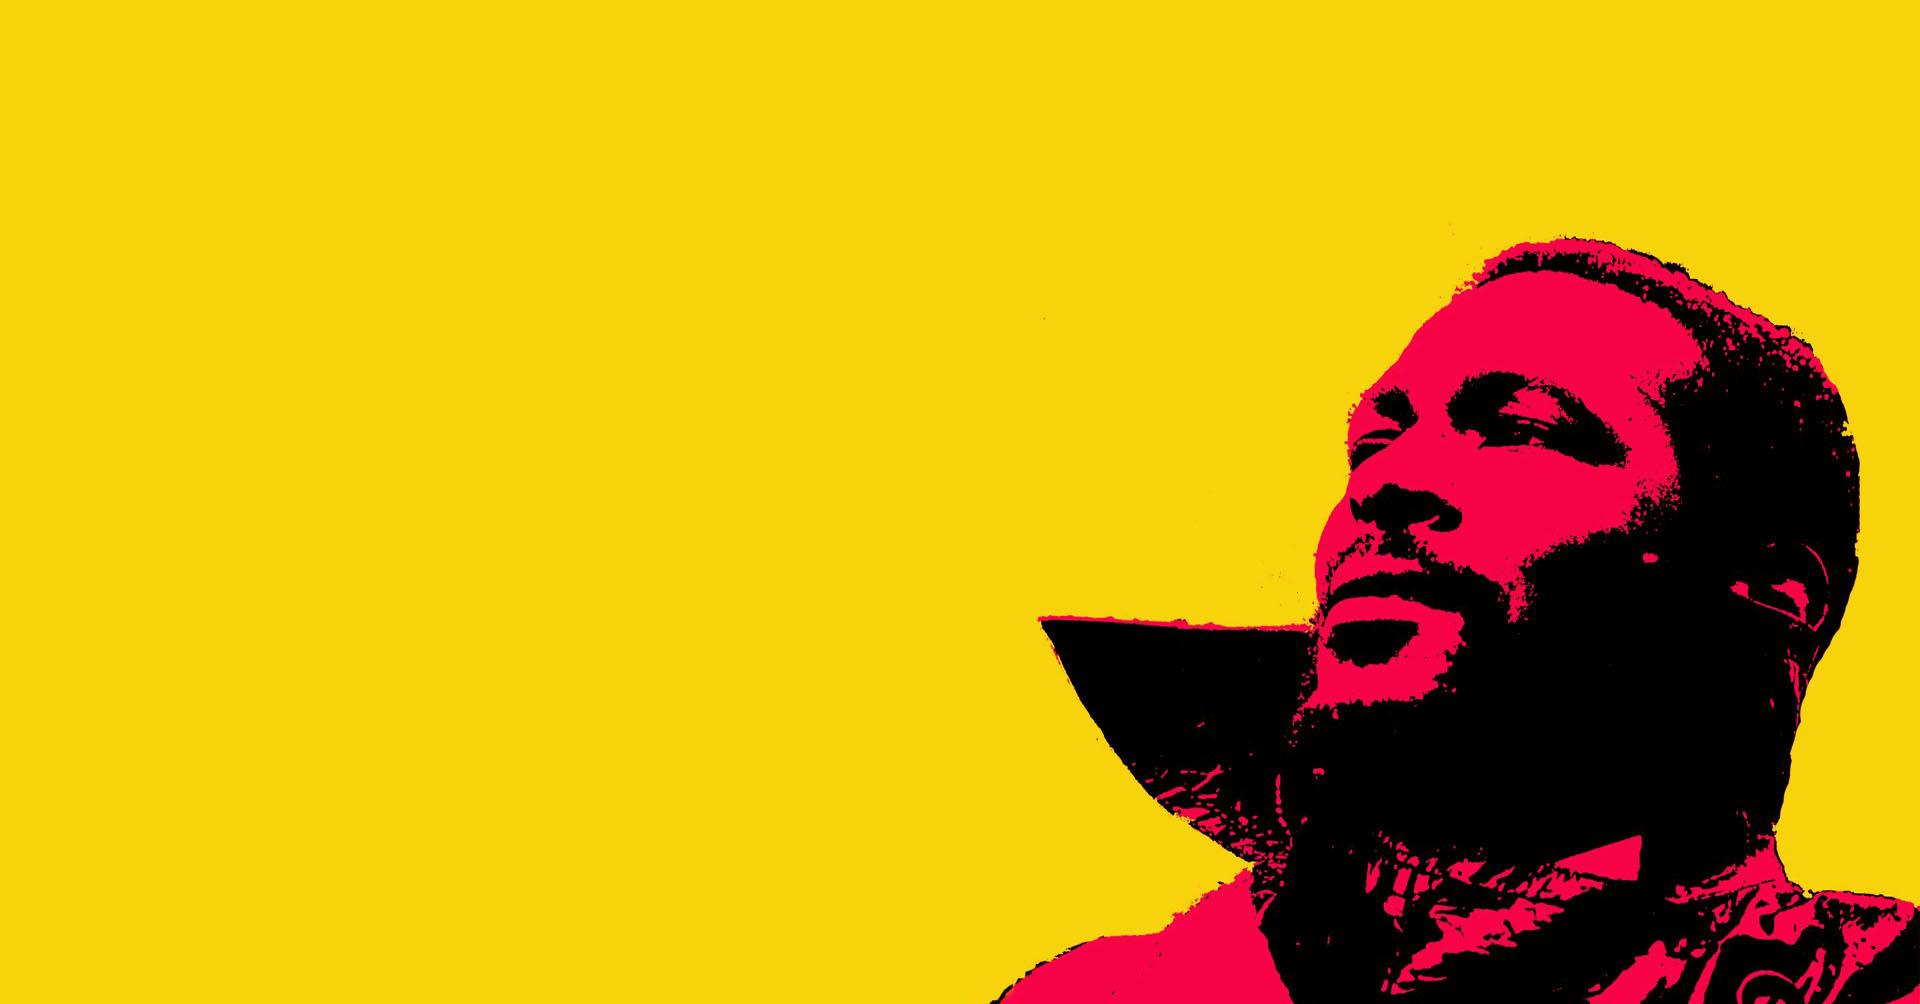 Marvin Gaye image Marvin Gaye HD wallpaper and background photo